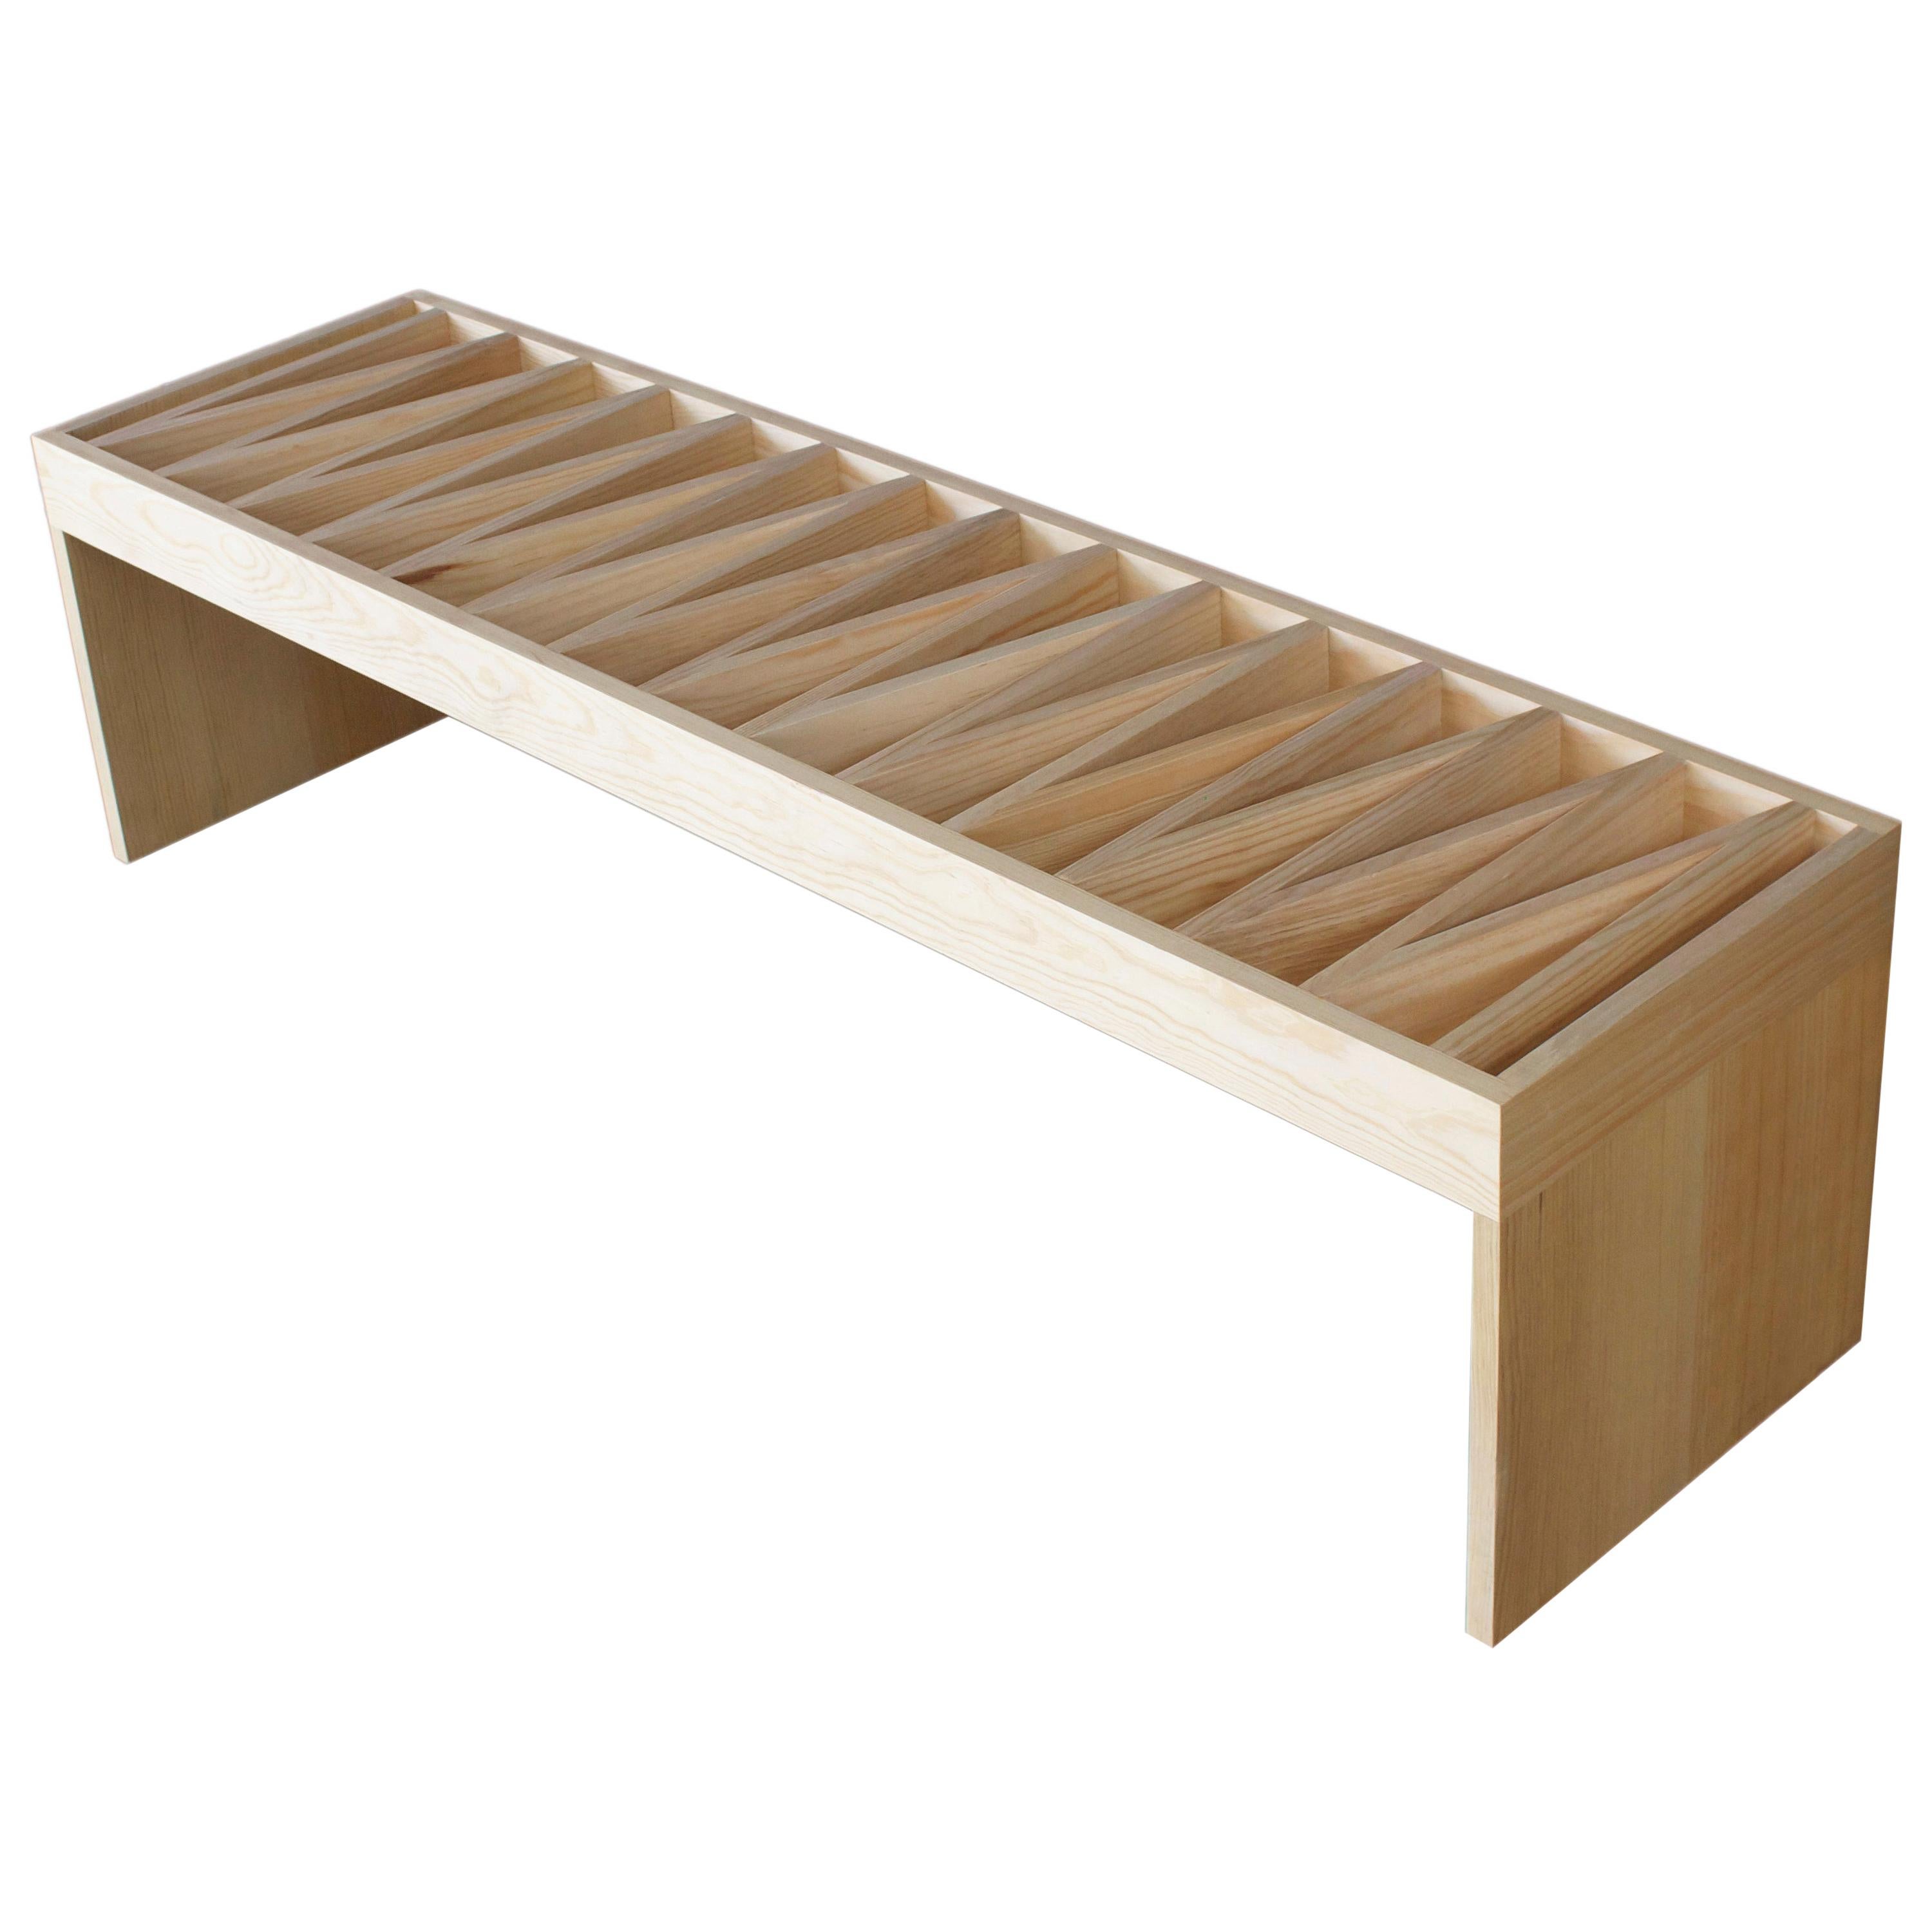 Banca Mia Bench by Maria Beckmann, Represented by Tuleste Factory